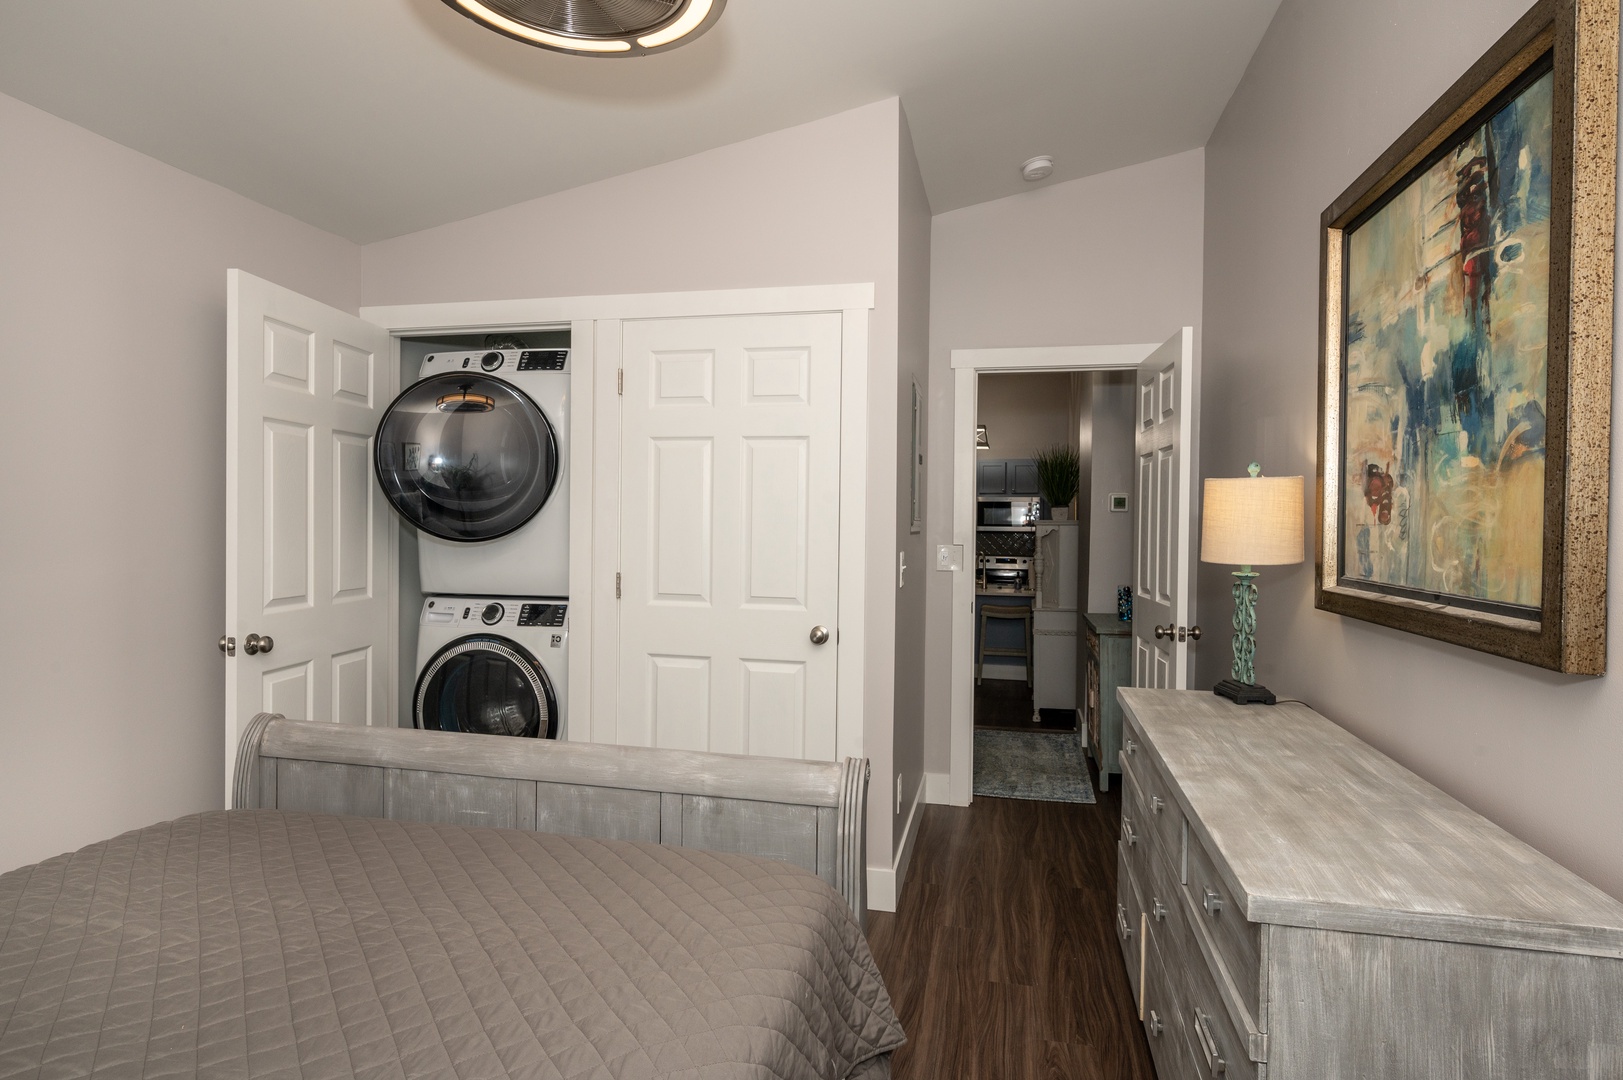 Apt 2 – Private laundry is neatly hidden in the bedroom closet